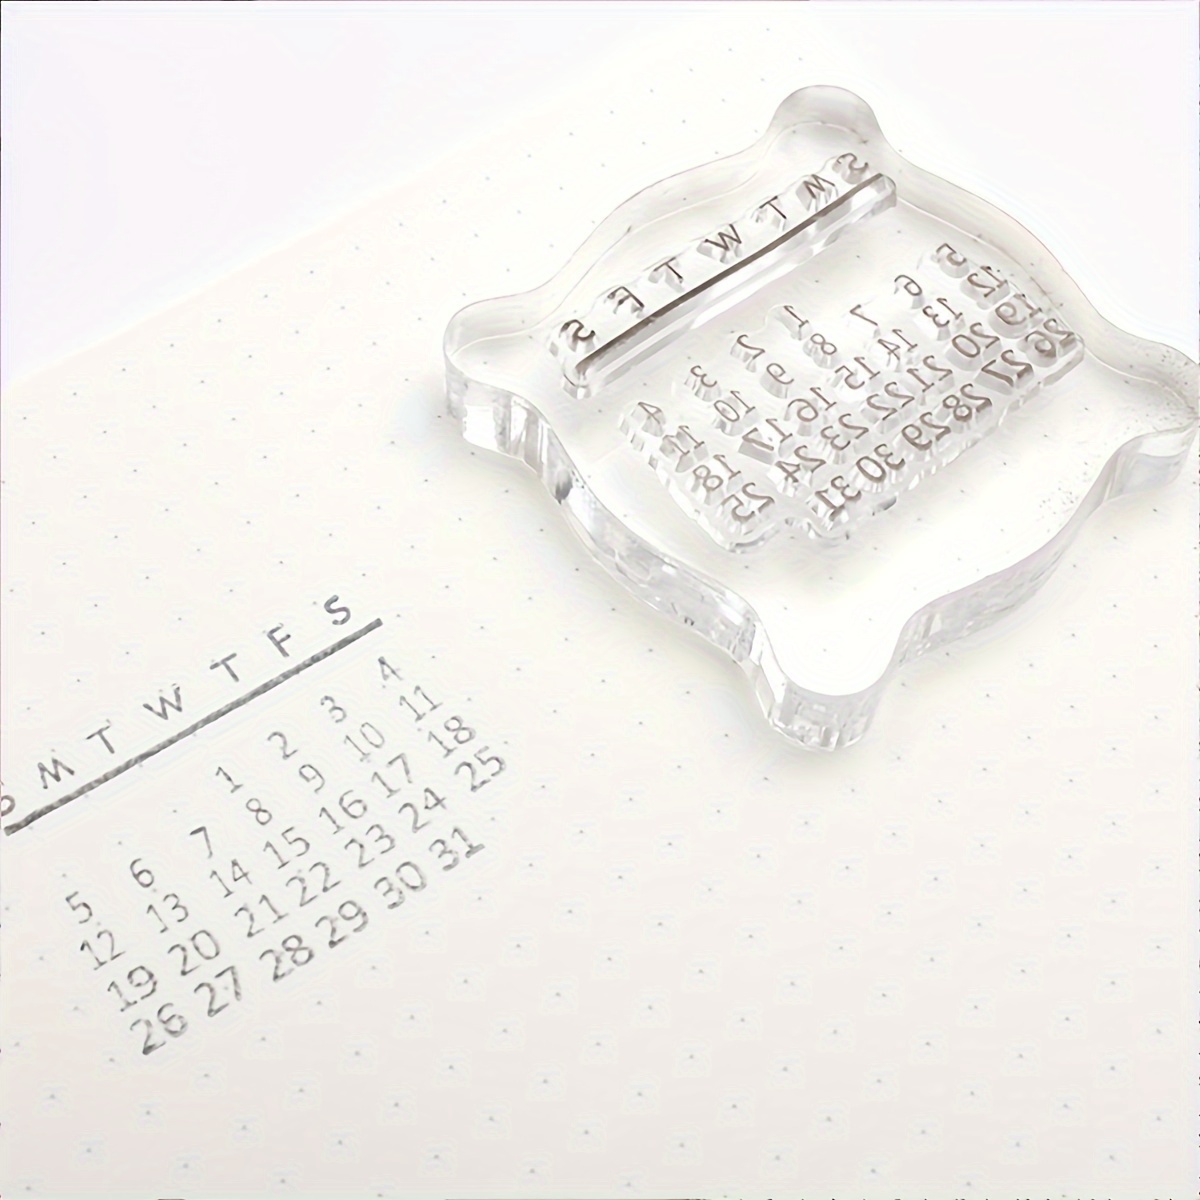 Calendar Clear Silicone Stamp Month Week Plan Rubber Stamp Stationery Craft  1pc